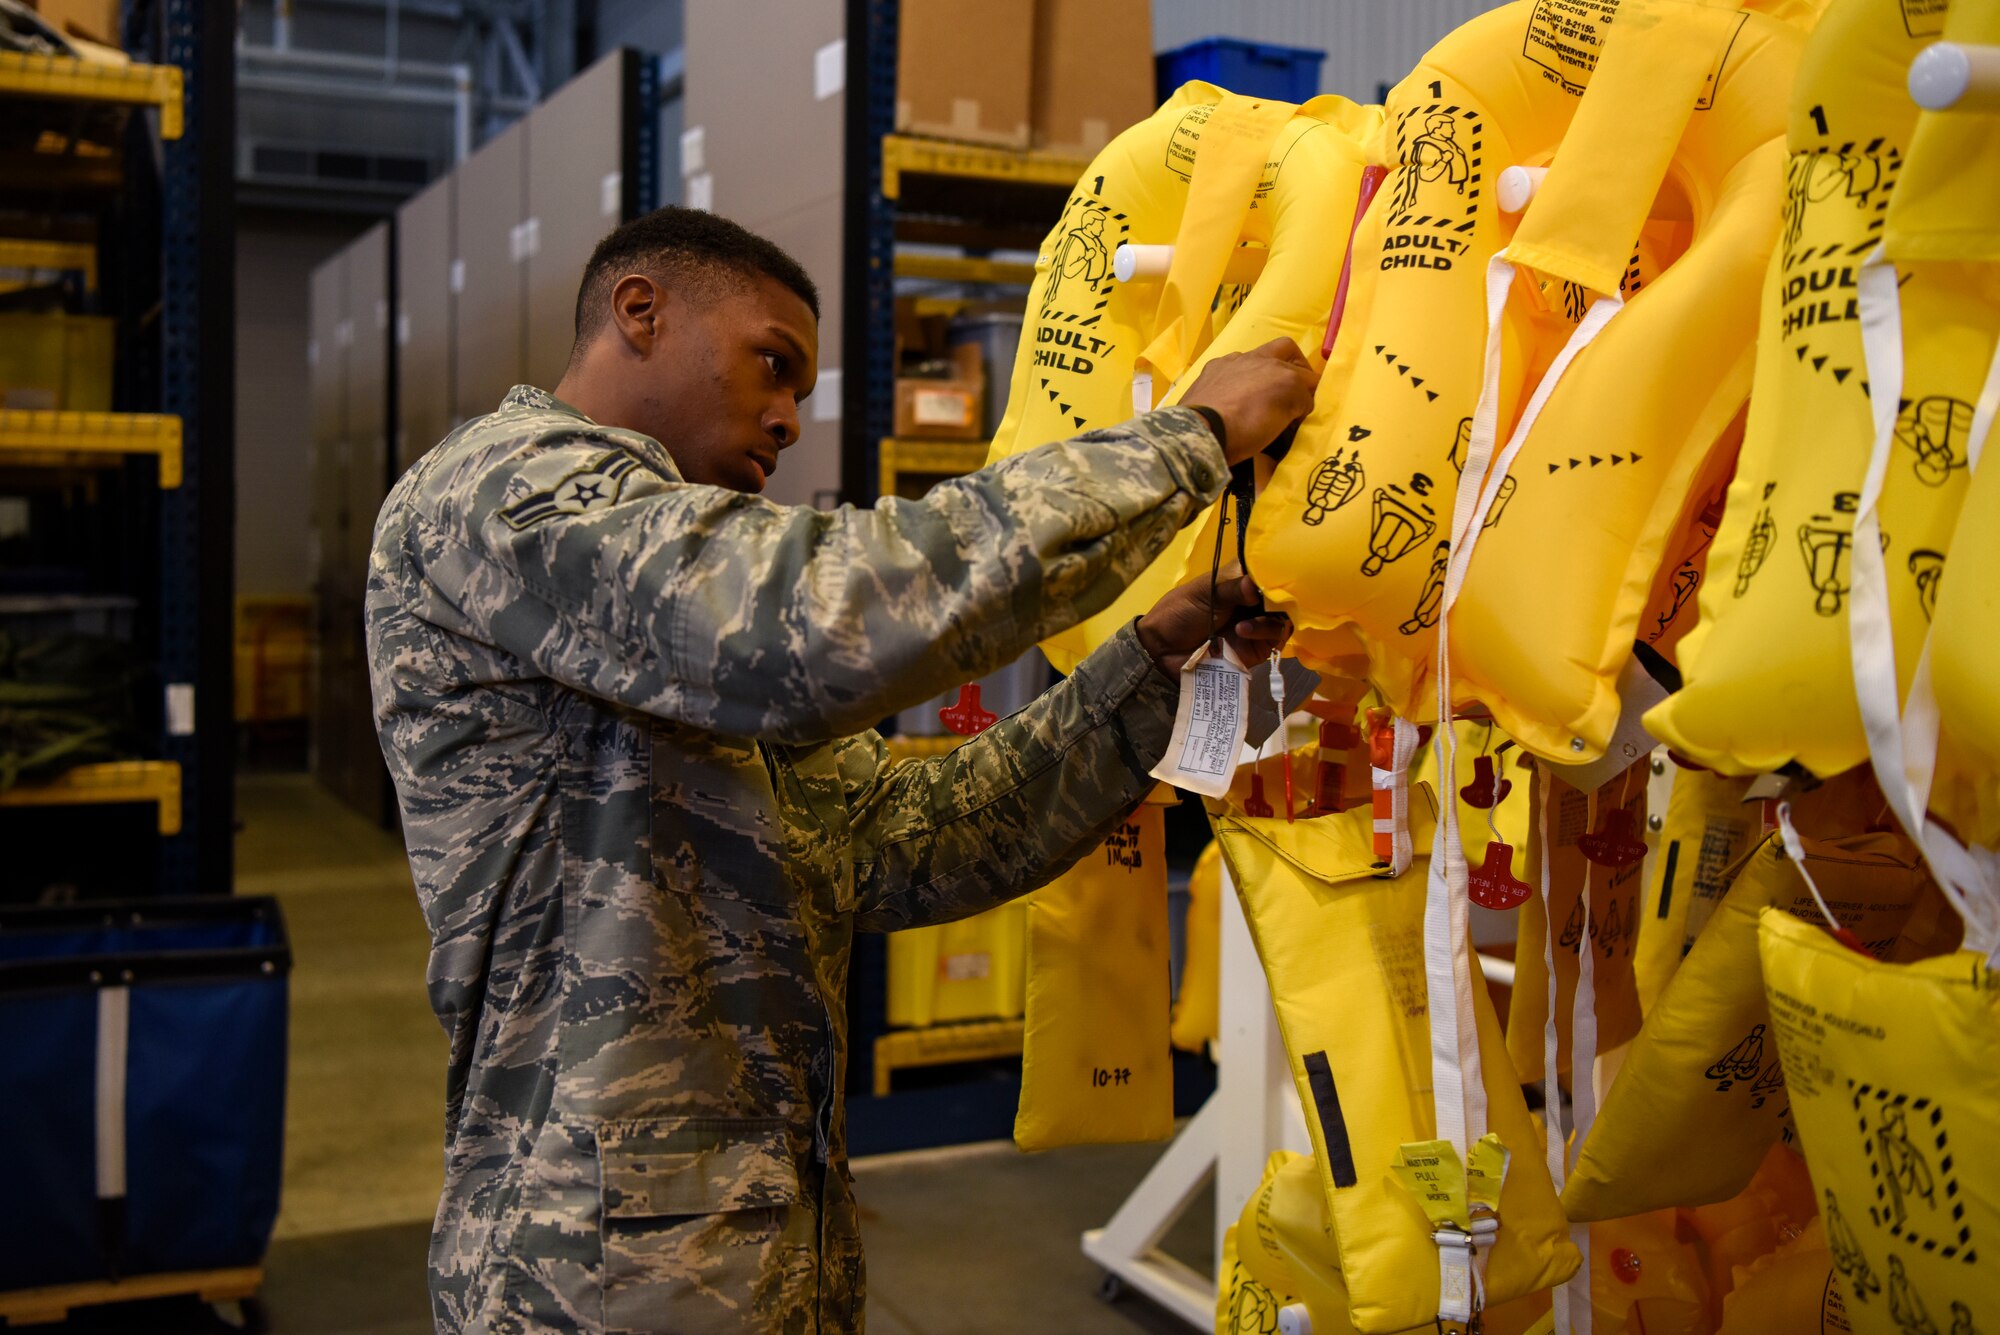 Airman 1st Class Anthony Gray, 436th Operations Support Squadron aircrew flight equipment apprentice, tests inflatable life preservers May 23, 2018, at Dover Air Force Base, Del. The life preservers are provided for the aircrew and any passengers who may be onboard. (U.S Air Force photo by Airman 1st Class Zoe M. Wockenfuss)